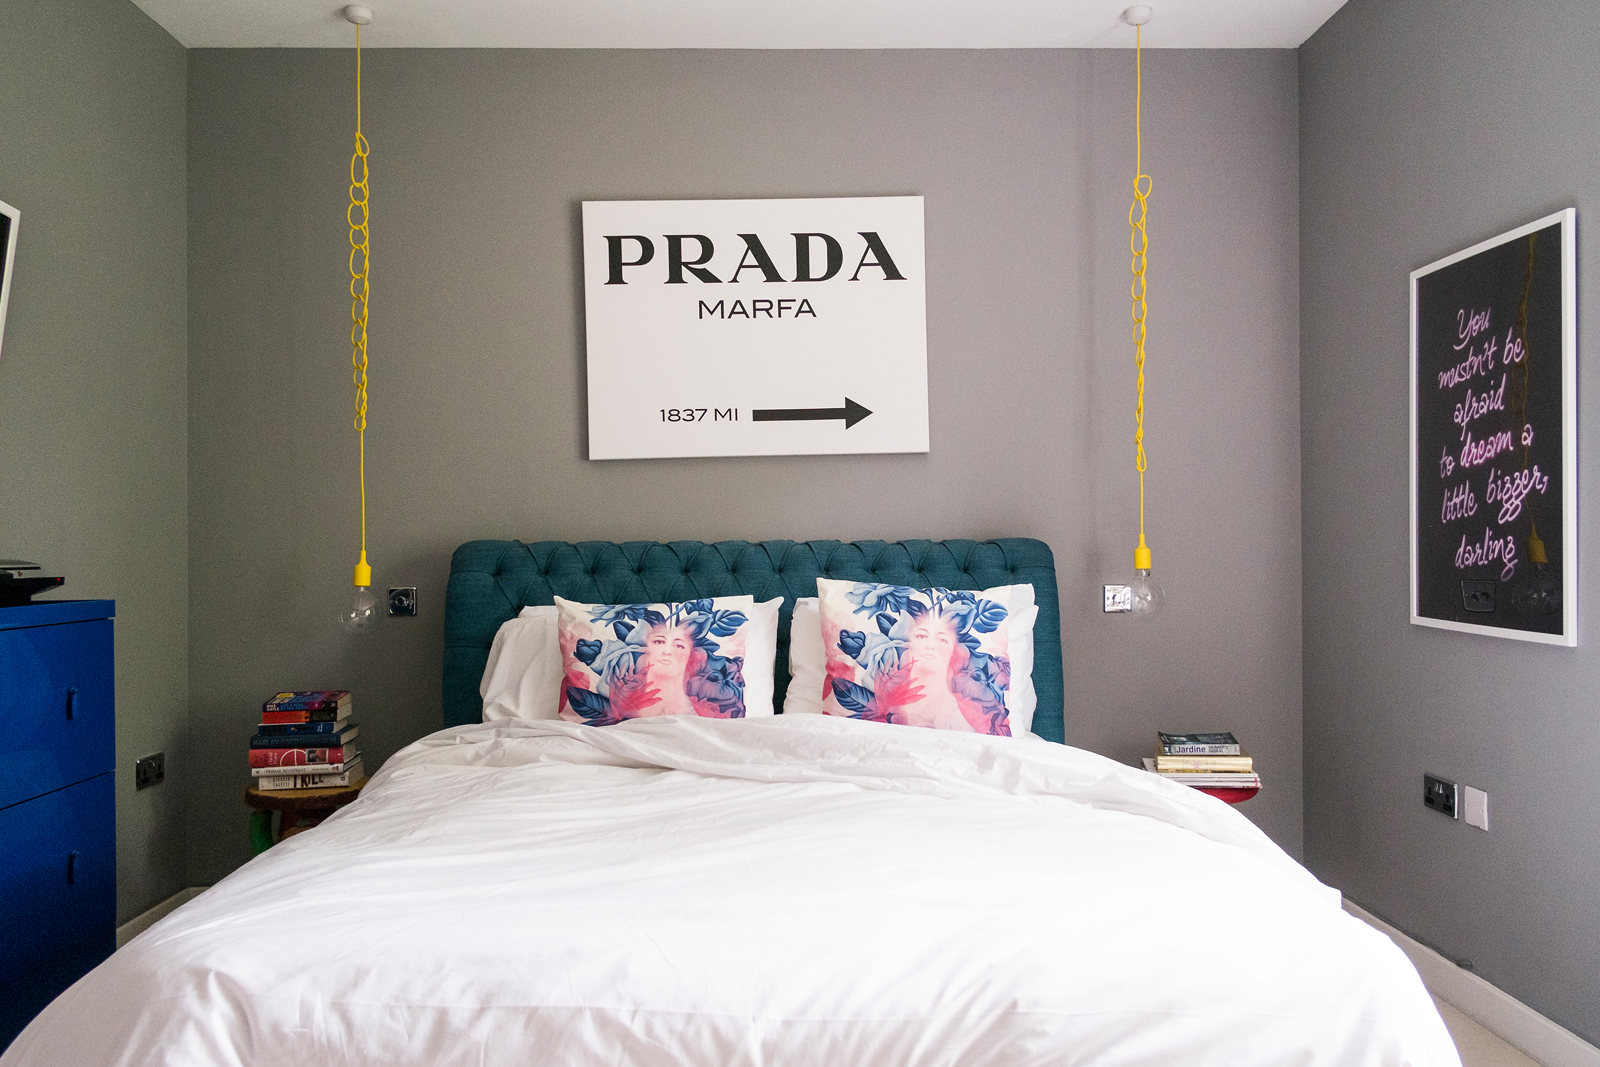 Emilie's bed is WELL comfy. And I know exactly how to get to Prada from here